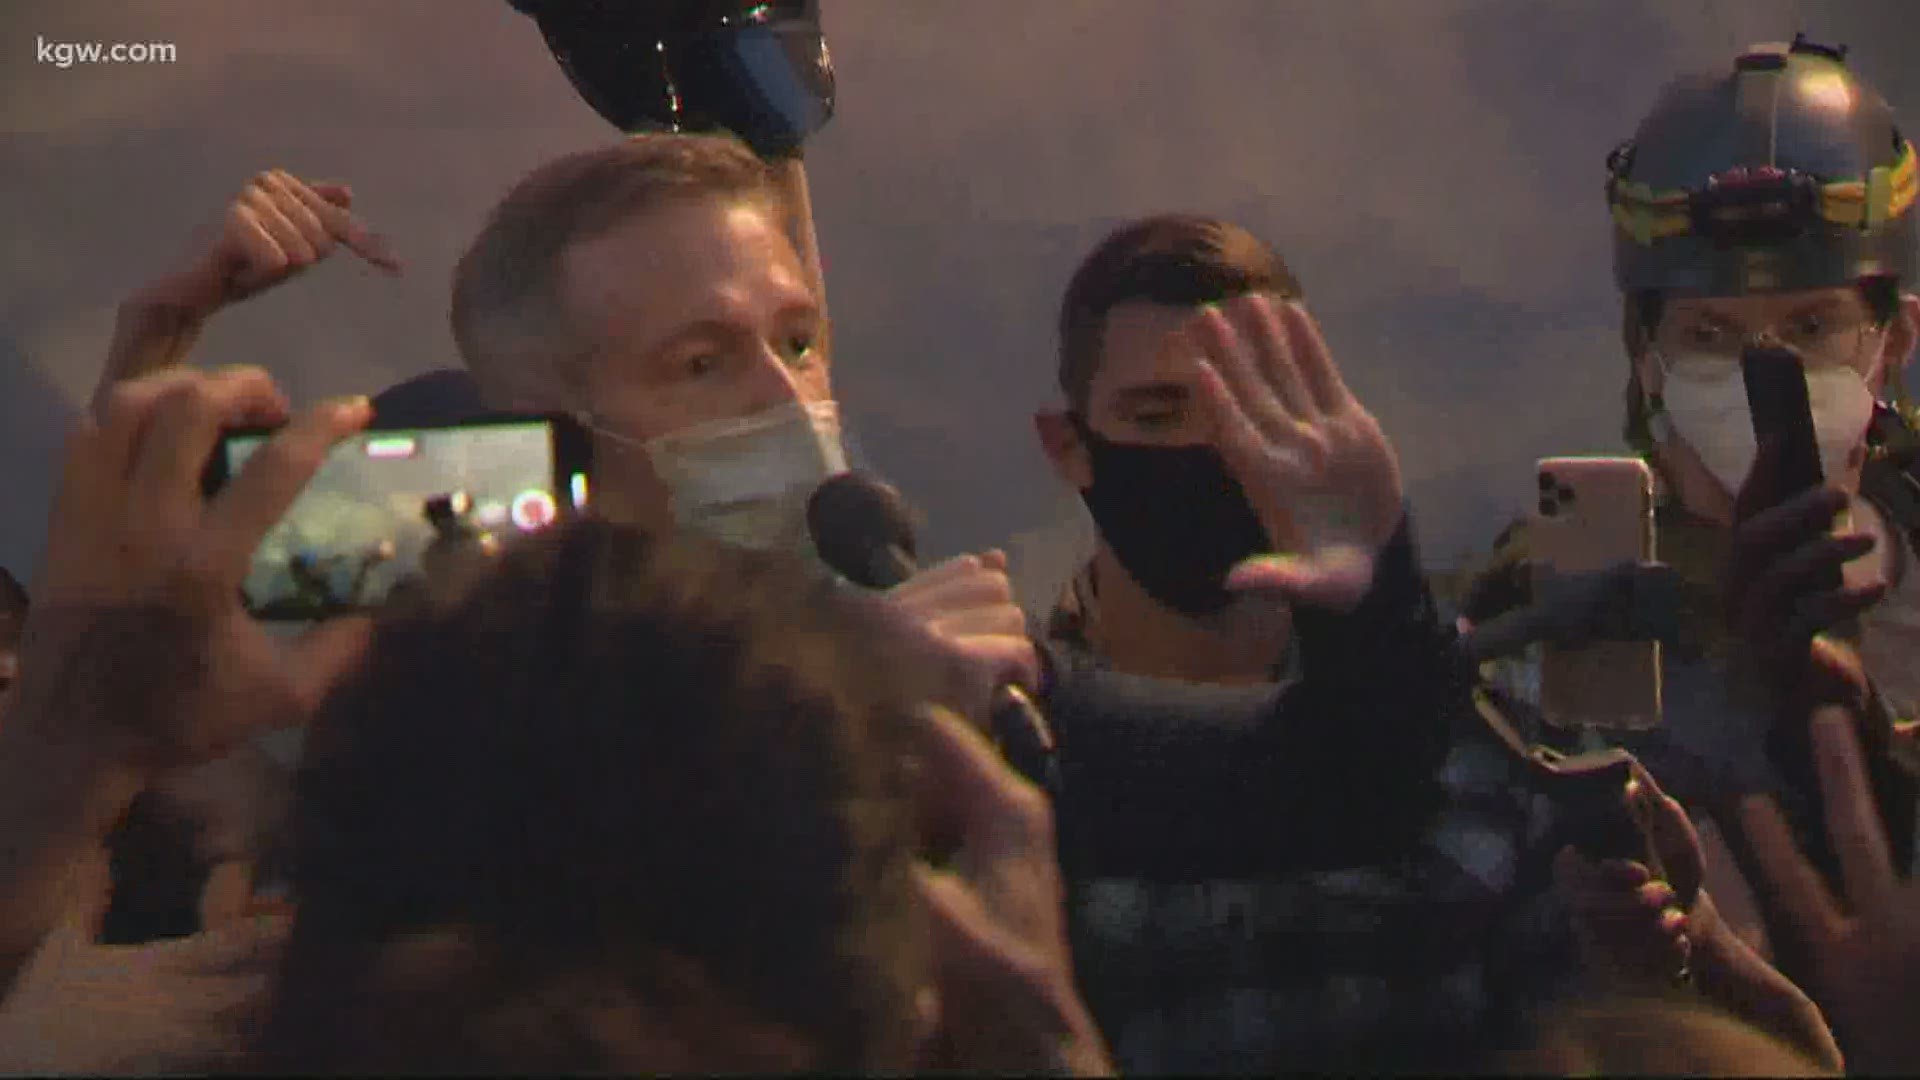 Mayor Ted Wheeler attended a protest in downtown Portland on Wednesday night. He told a large crowd that he was there to listen.